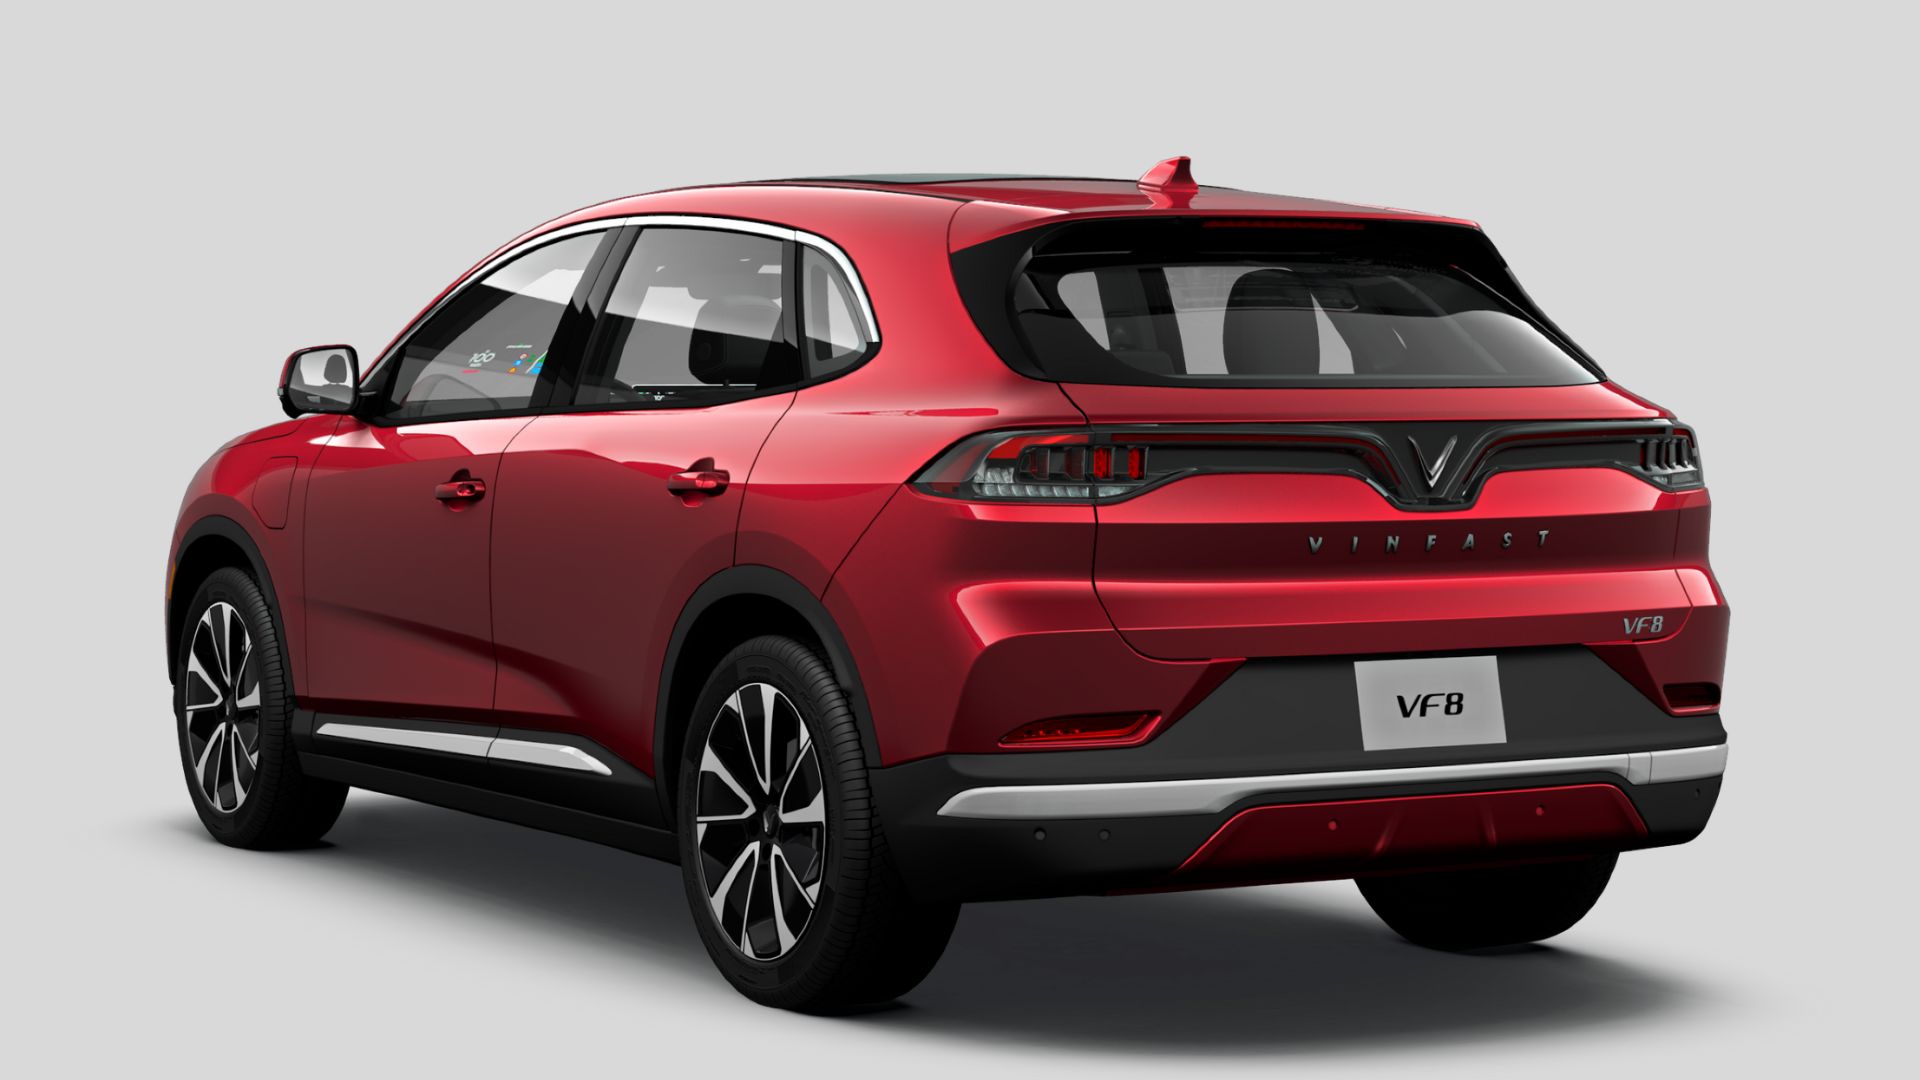 https://e-vehicleinfo.com/vinfast-to-launch-2-new-electric-cars-vf8-vf9-with-baas-model-price-details/